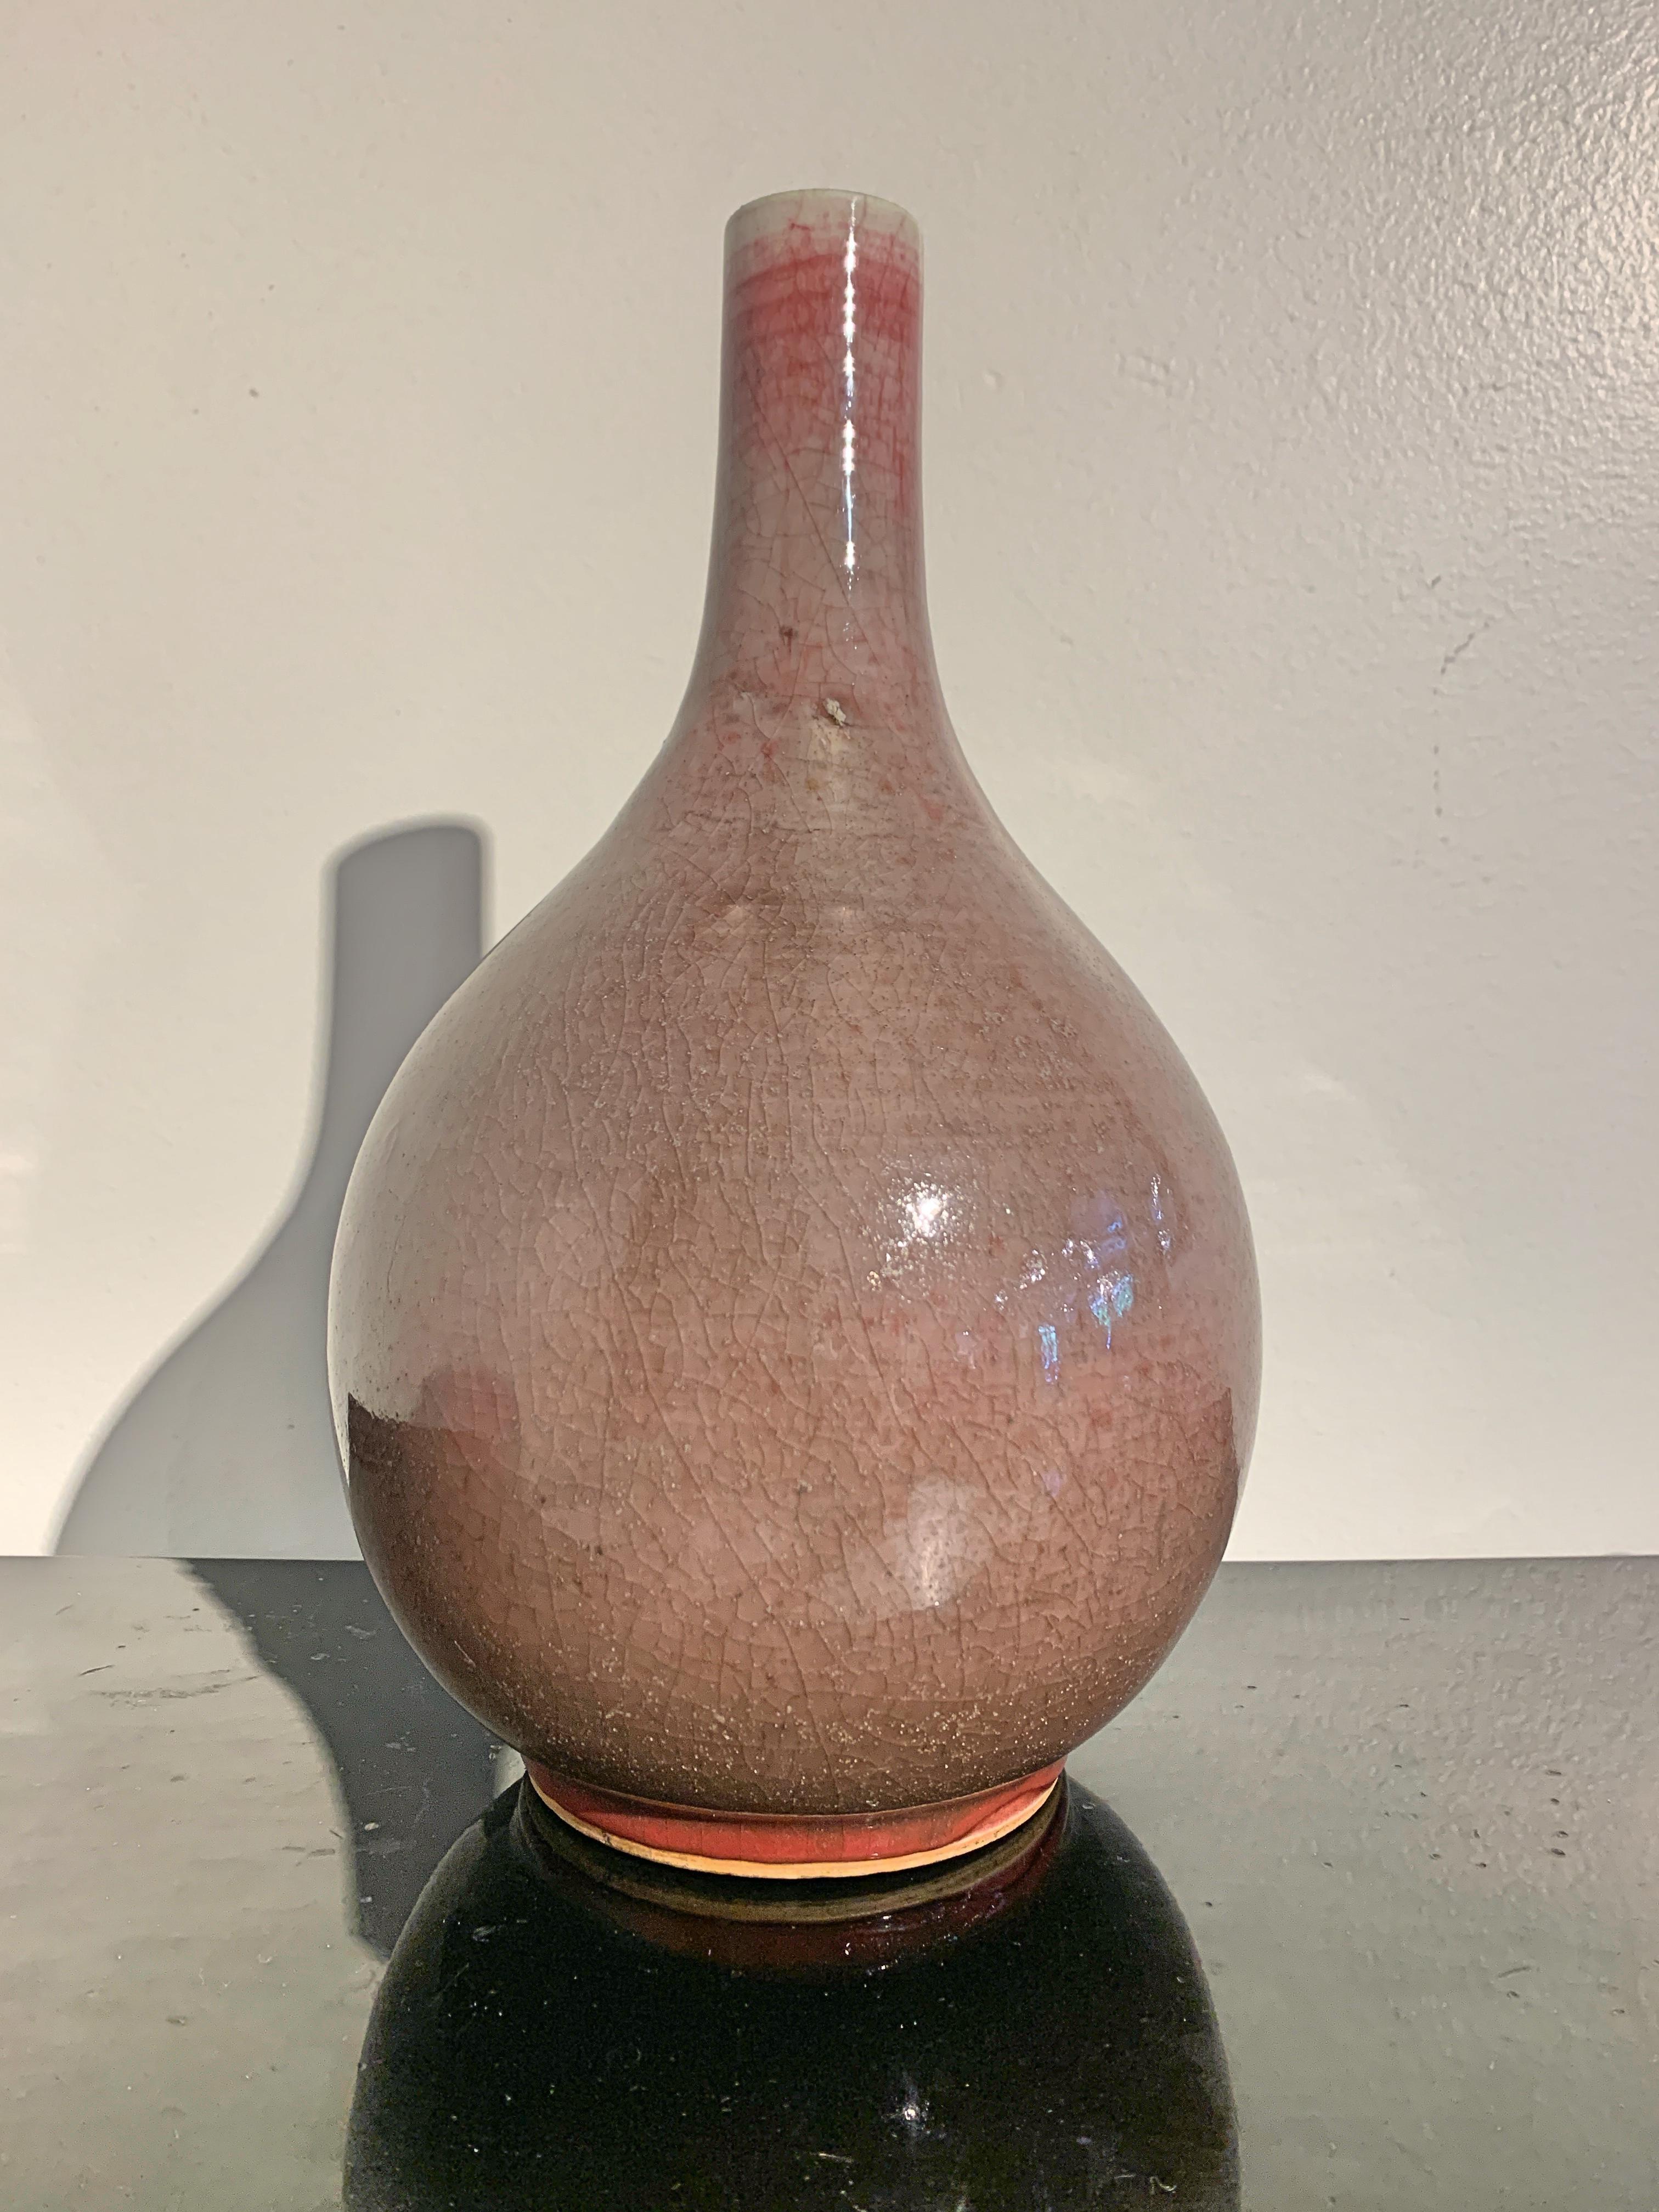 A rare and demure Chinese peachbloom glazed porcelain bottle vase, Qing dynasty, 19th century, China.

The bottle vase of voluptuous form and elegant proportions, with a generous body of globular form and a narrow stick neck, all resting on a